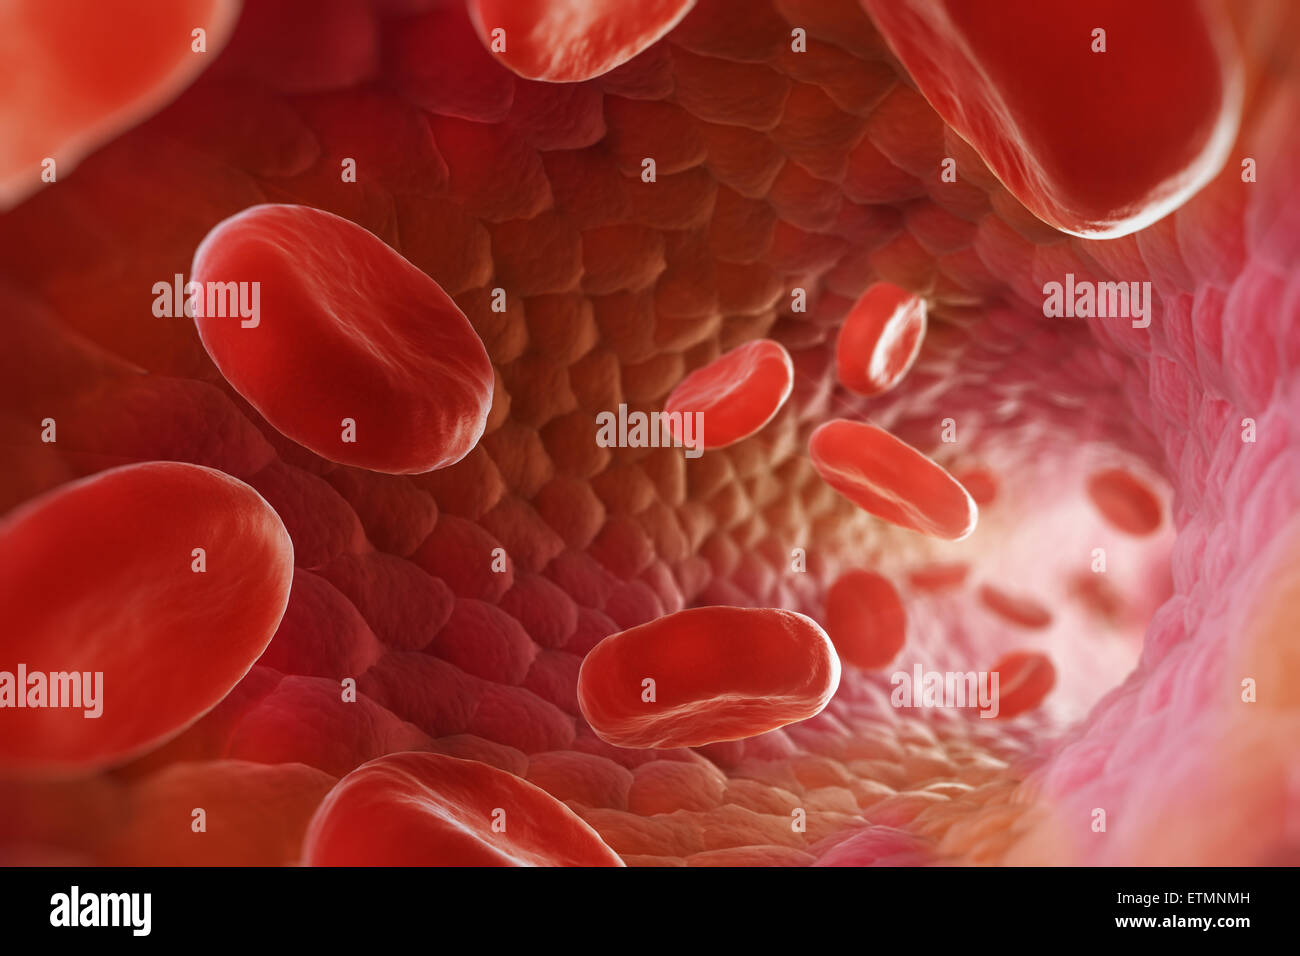 Stylized illustration showing red blood cells flowing through the blood stream. Stock Photo